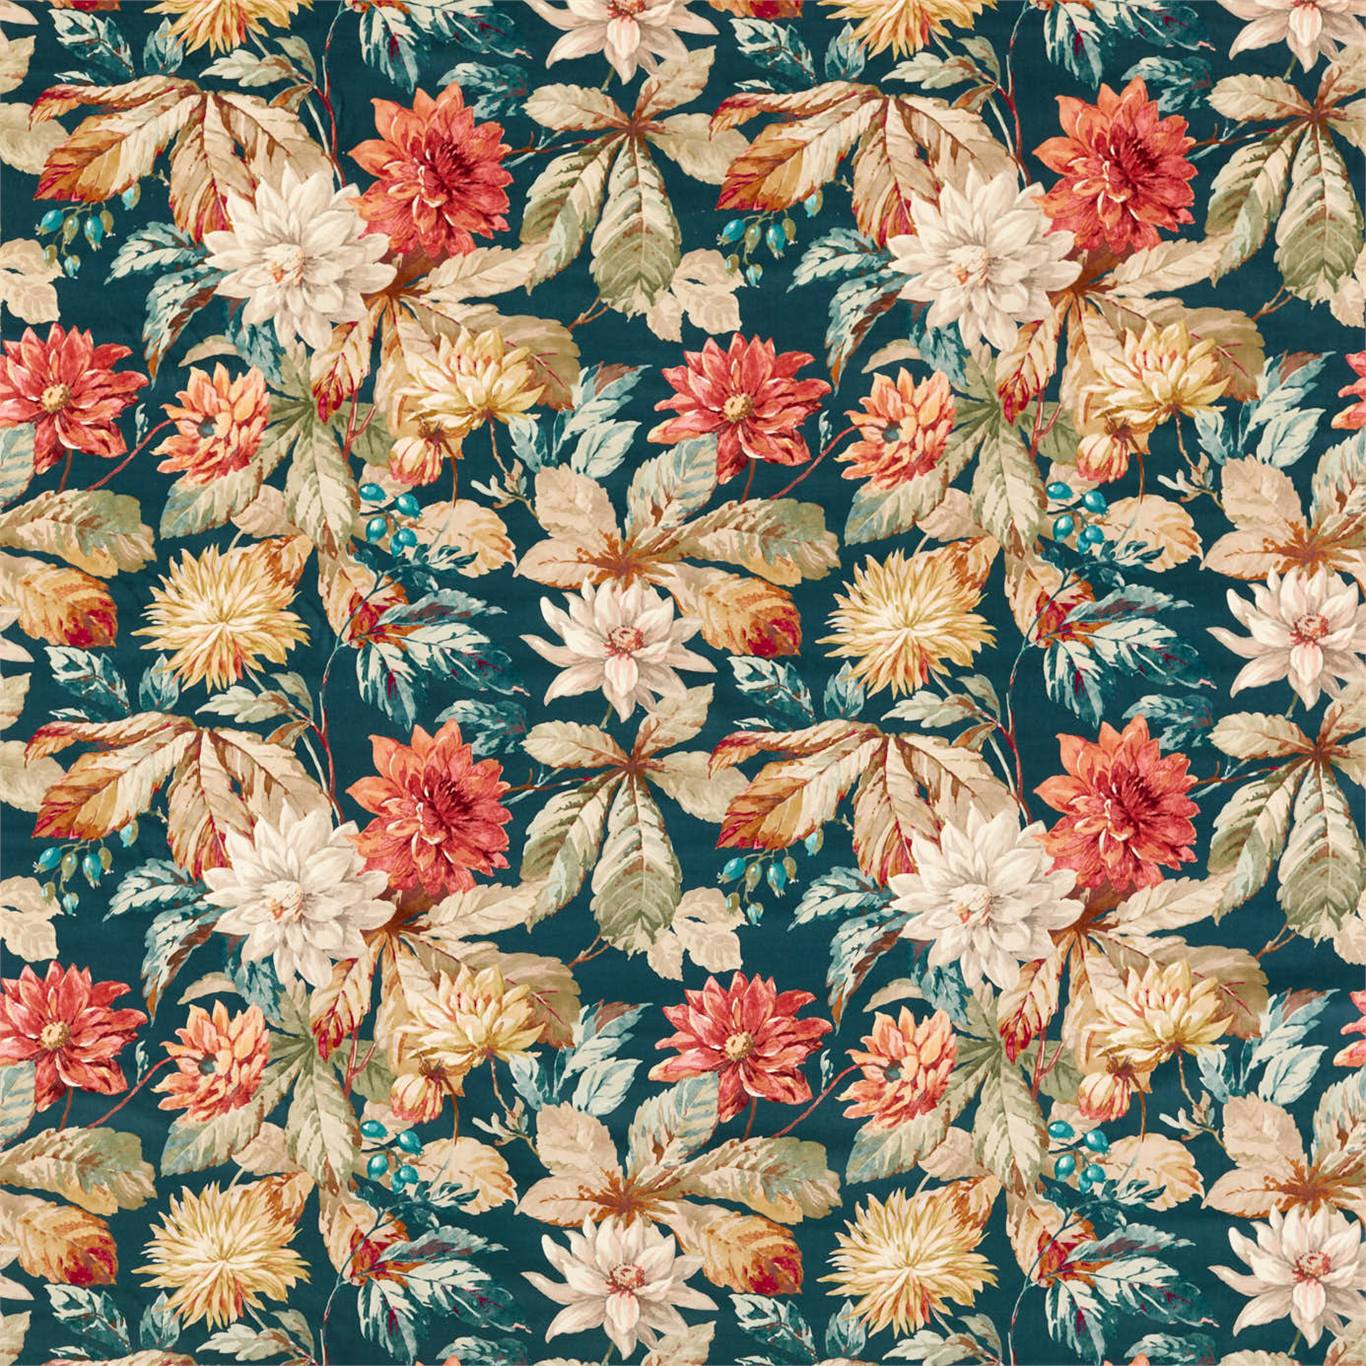 Dahlia and Rosehip Teal/Russet (Velvet) Fabric By Sanderson